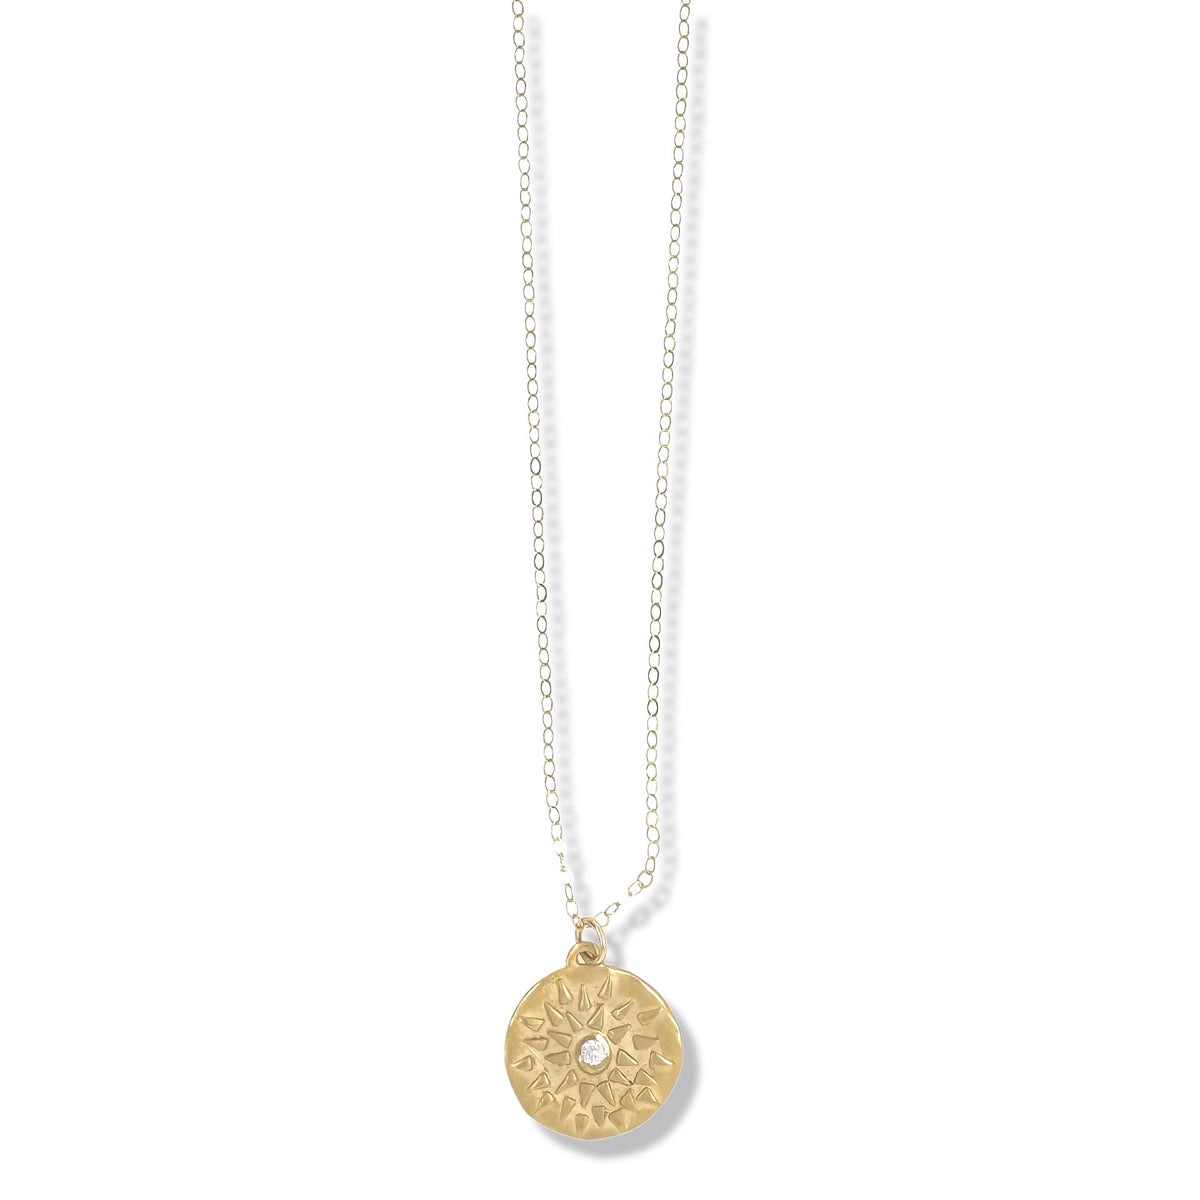 Mira Necklace in Gold By Keely Smith Jewelry Designs